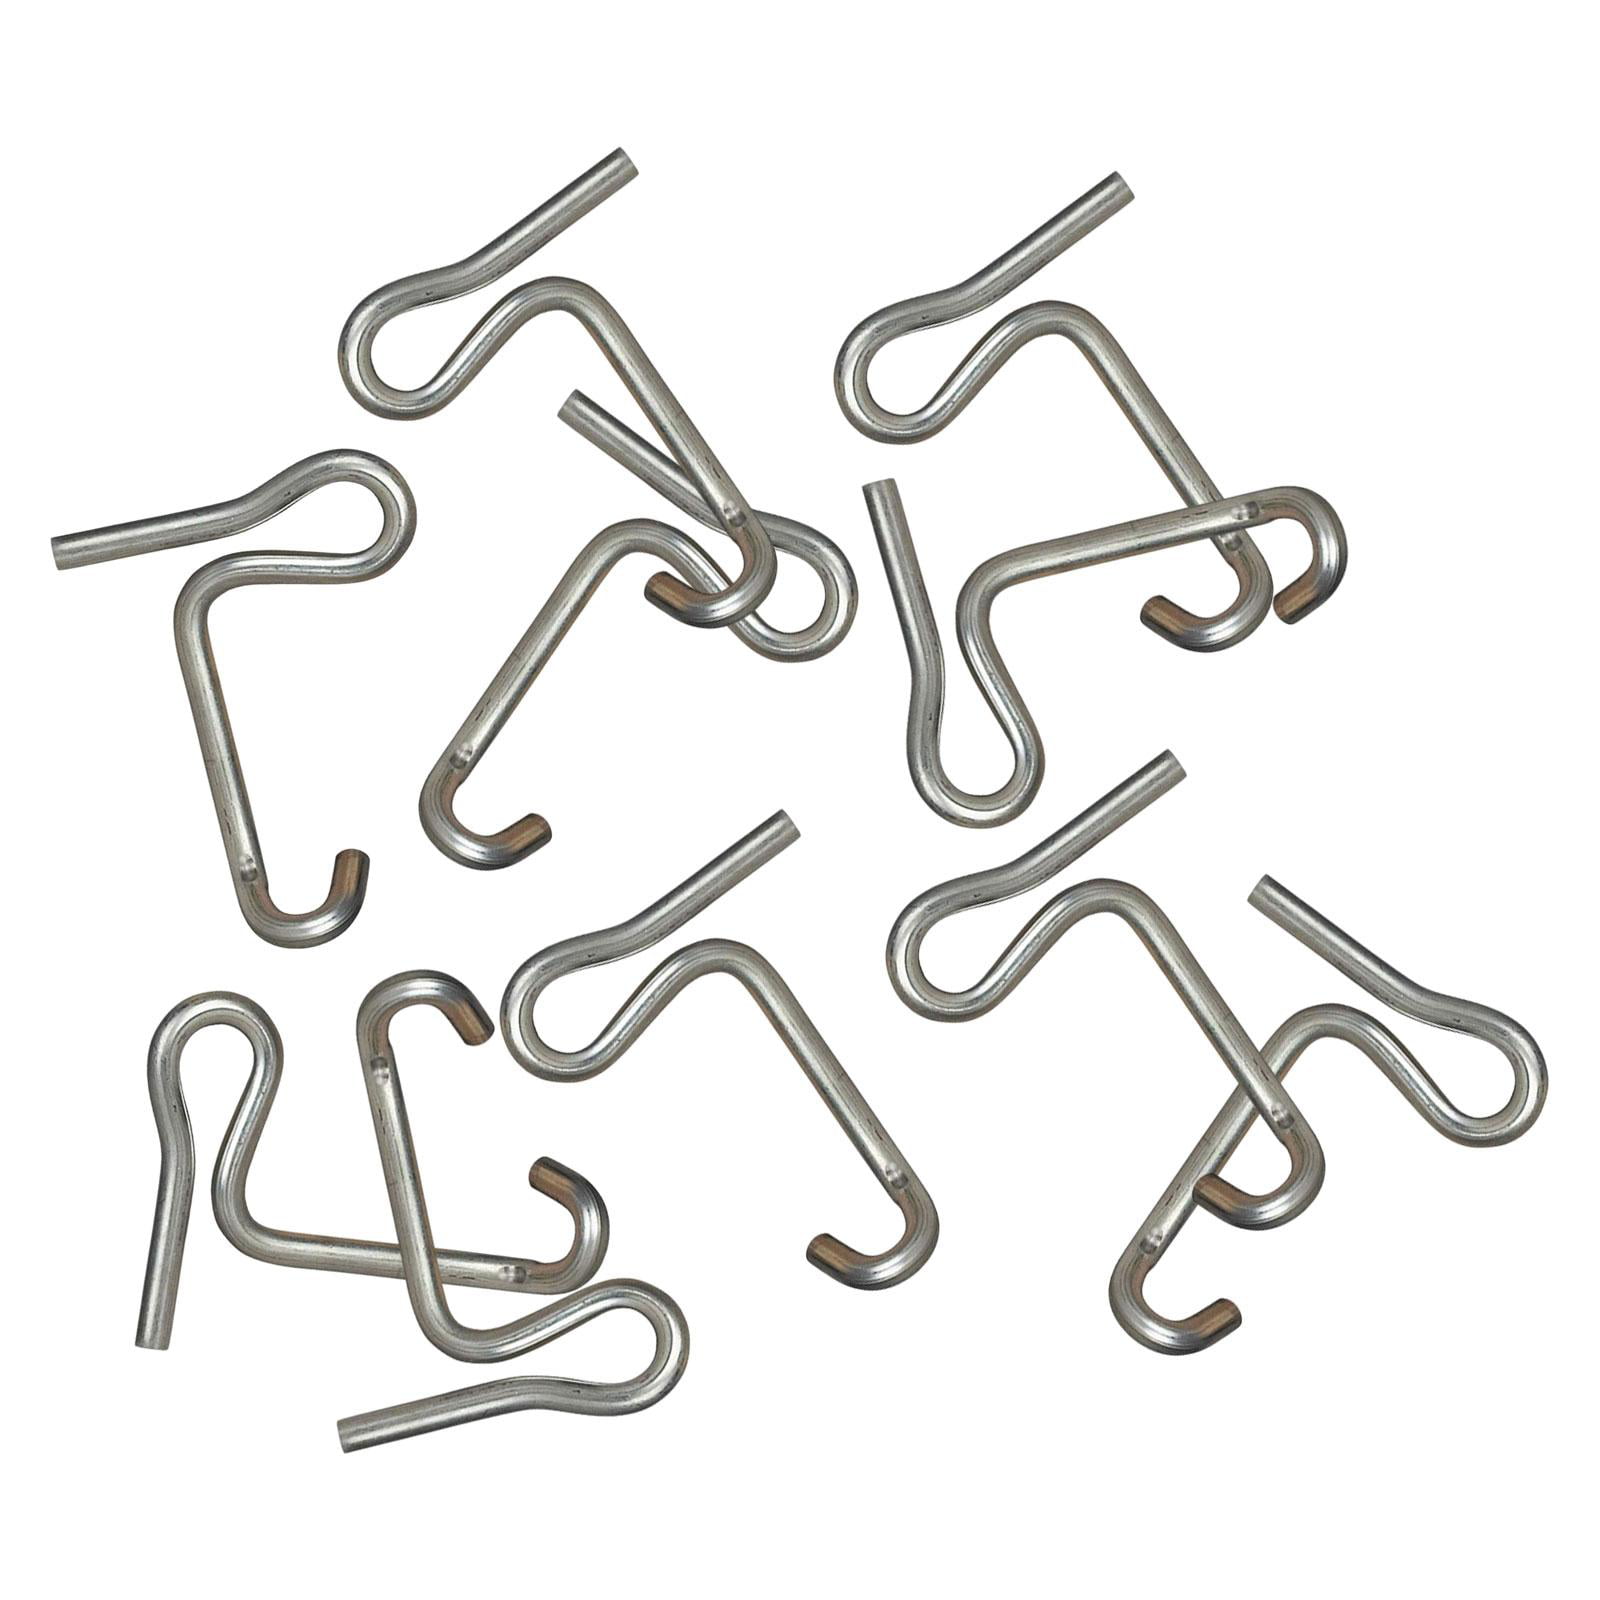 20pcs Fence Wire Tensioner Tool Stainless Steel Barb Wire Tension Repair Tool - Silver Tone